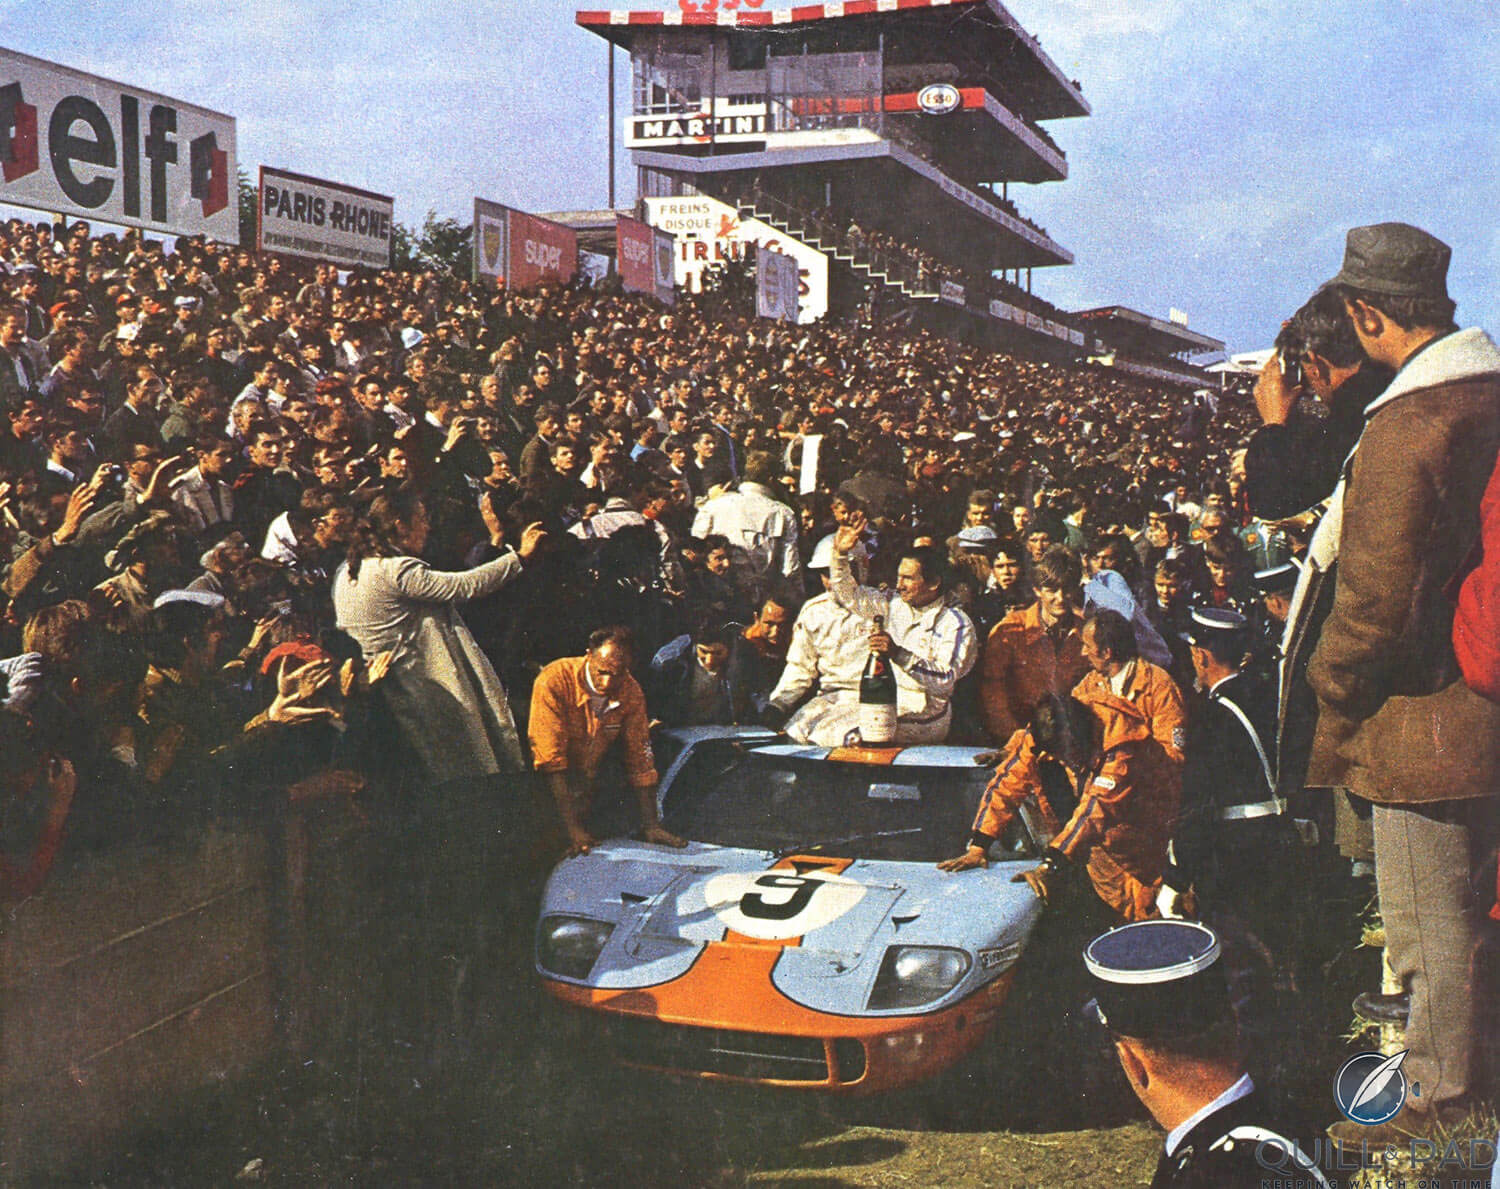 Gulf Oil team at the end of Le Mans 1968